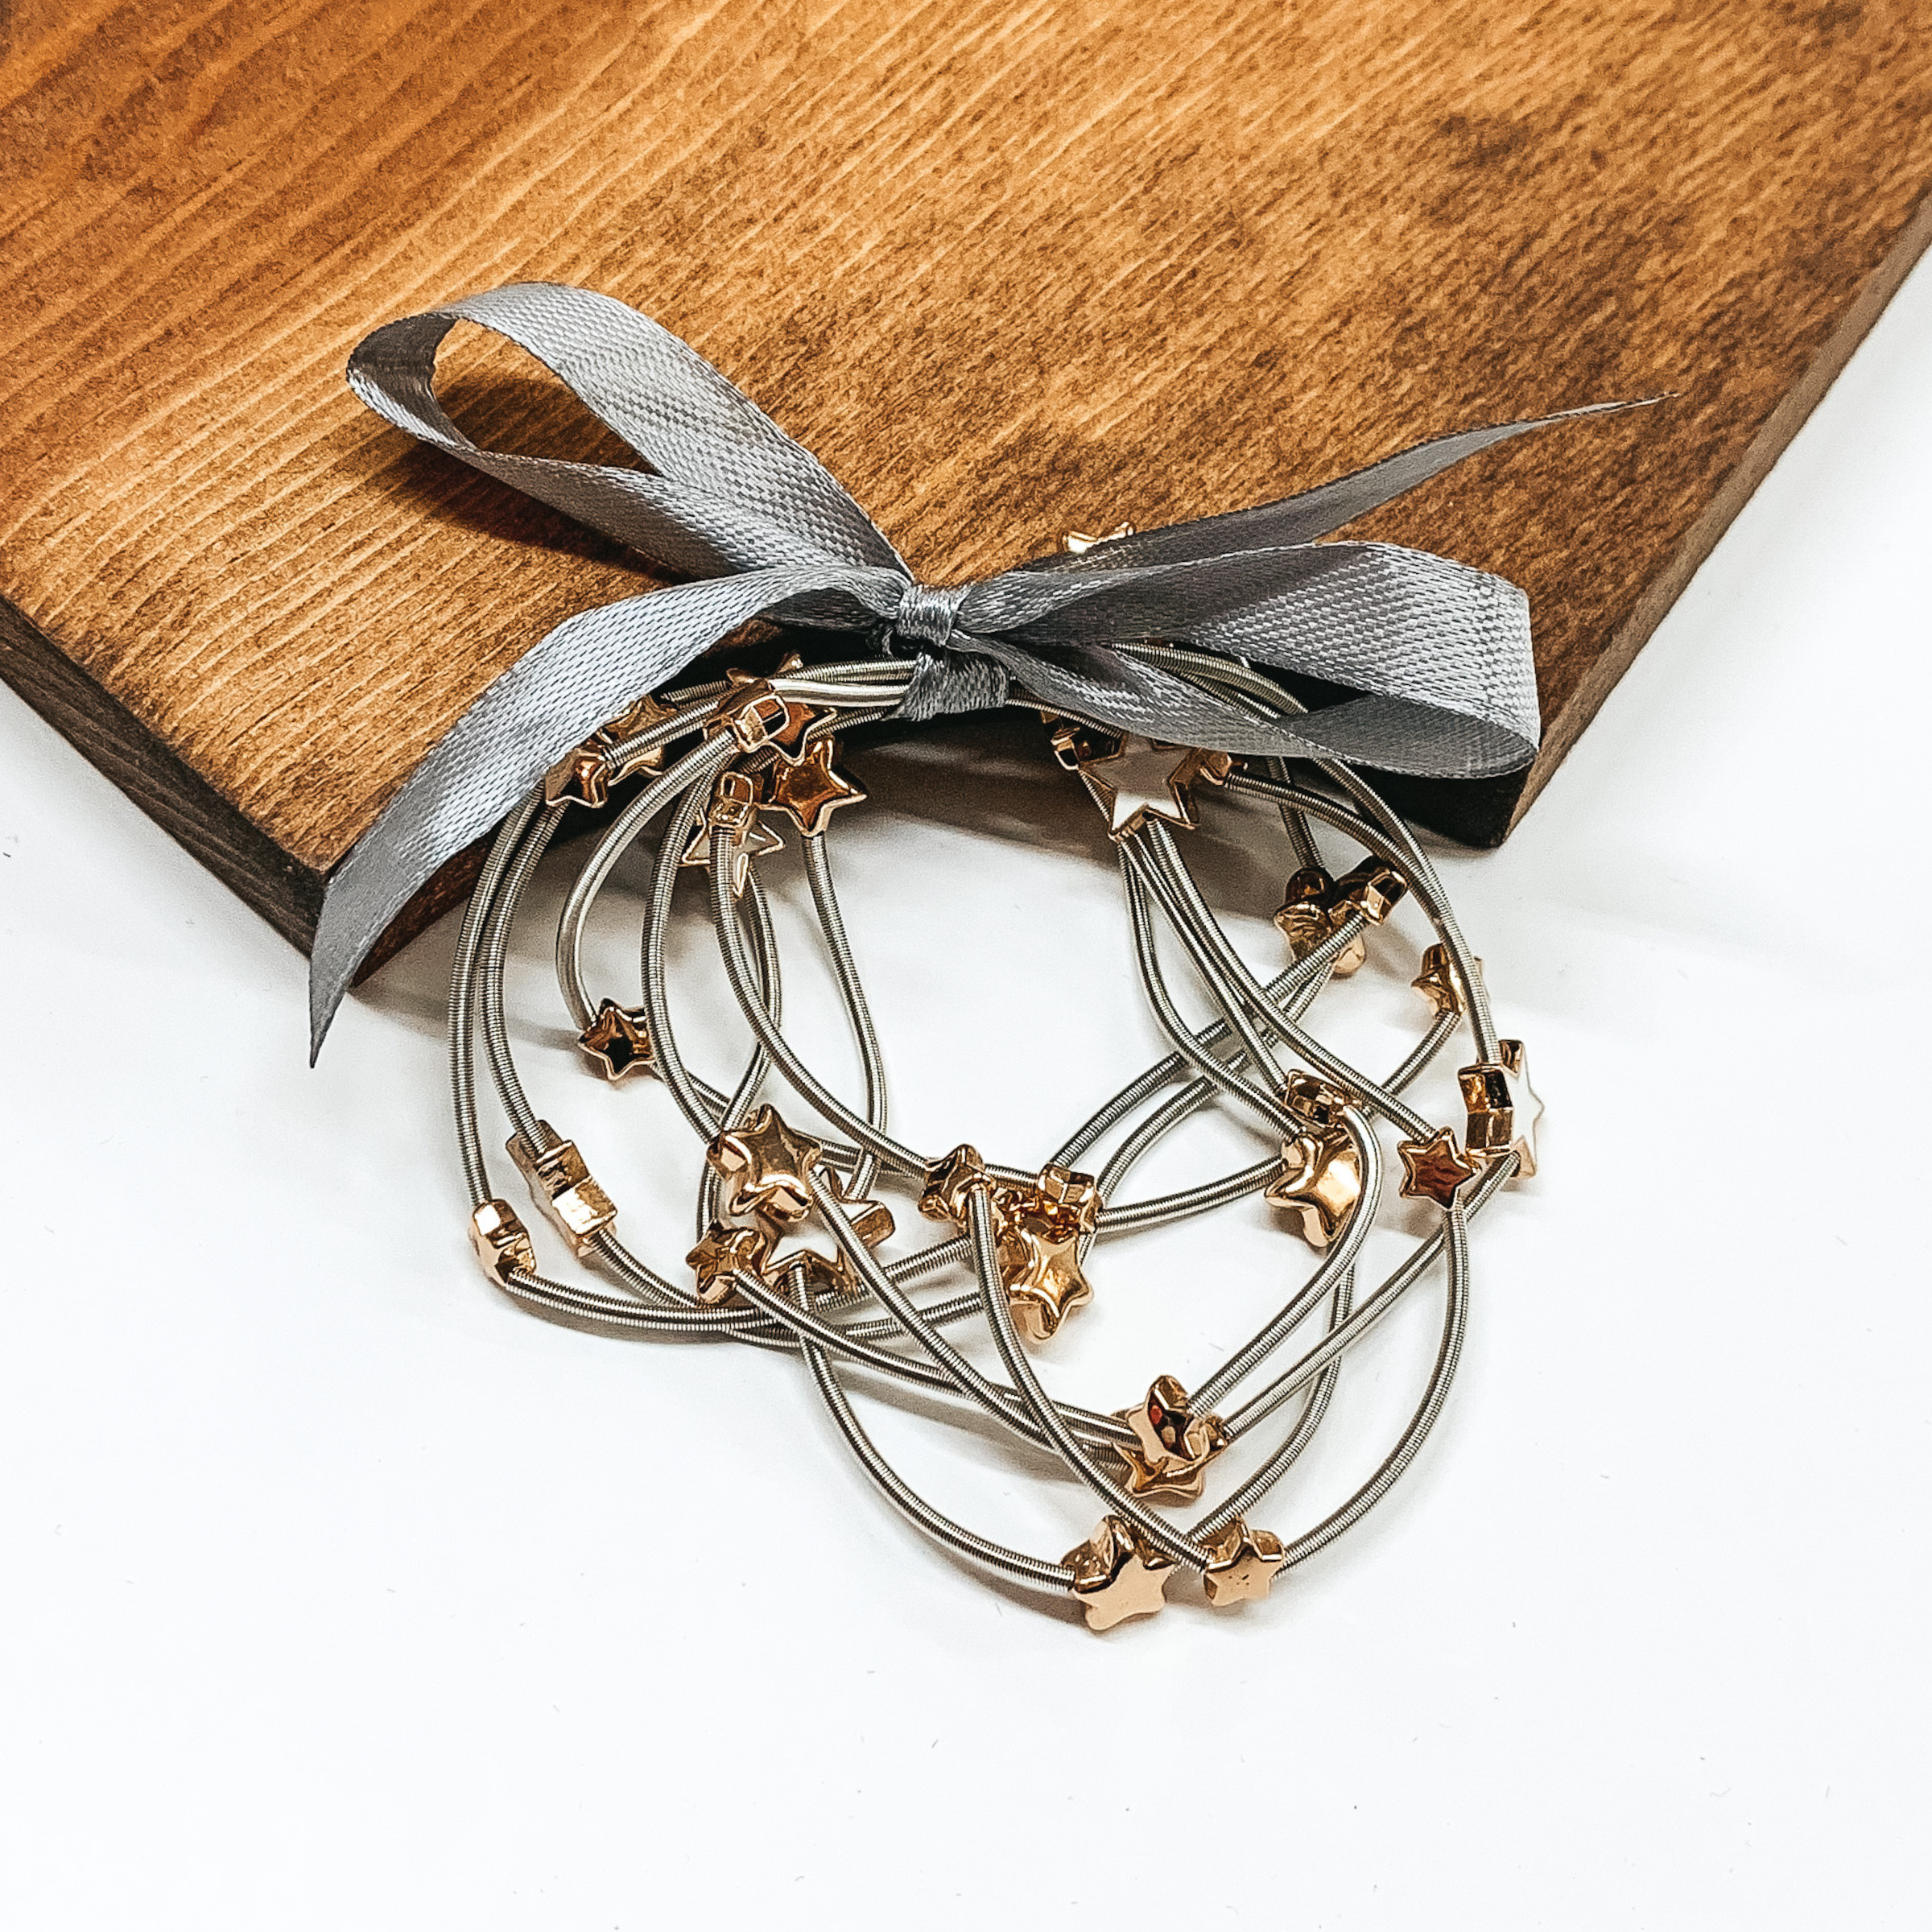 Group of silver spring wire elastic bracelet set tied together with a silver ribbon that is tied in a bow. All of the bracelets have small gold star beads. This bracelet set is pictured laying next on a piece of wood on a white background.